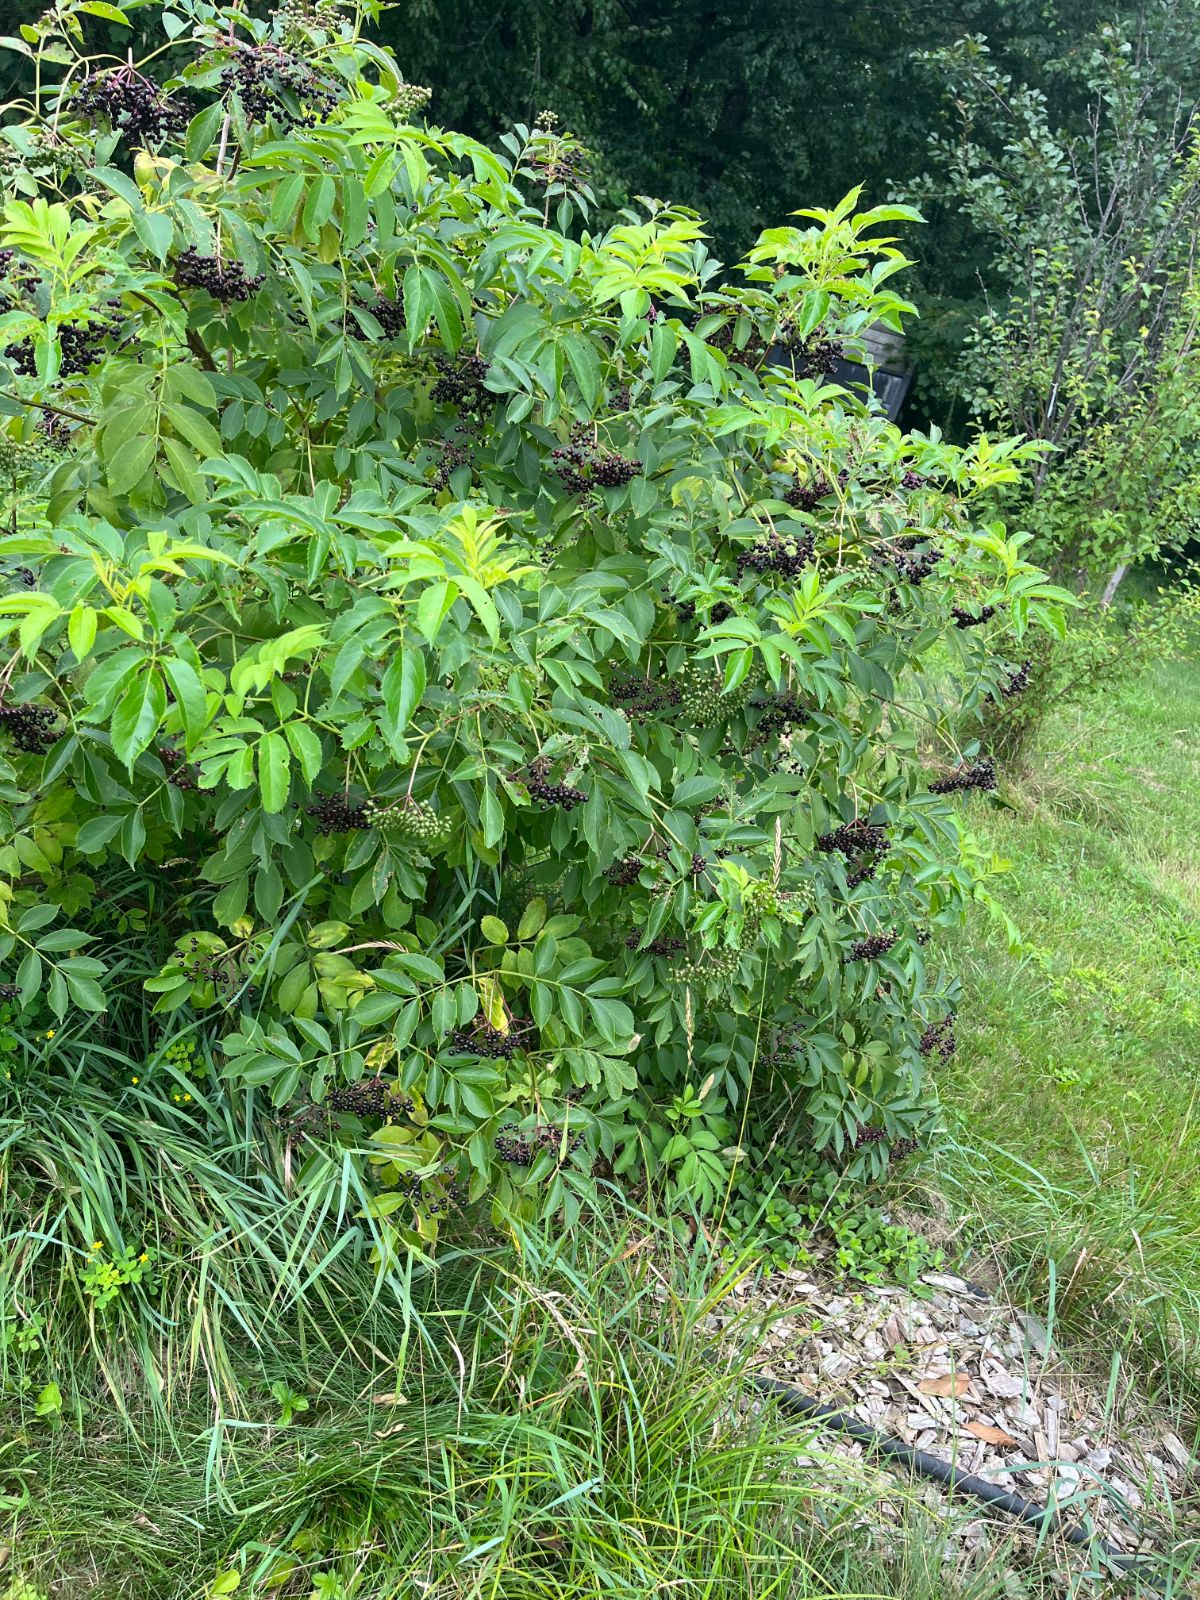 An elderberry bush with berries in different stages of ripening